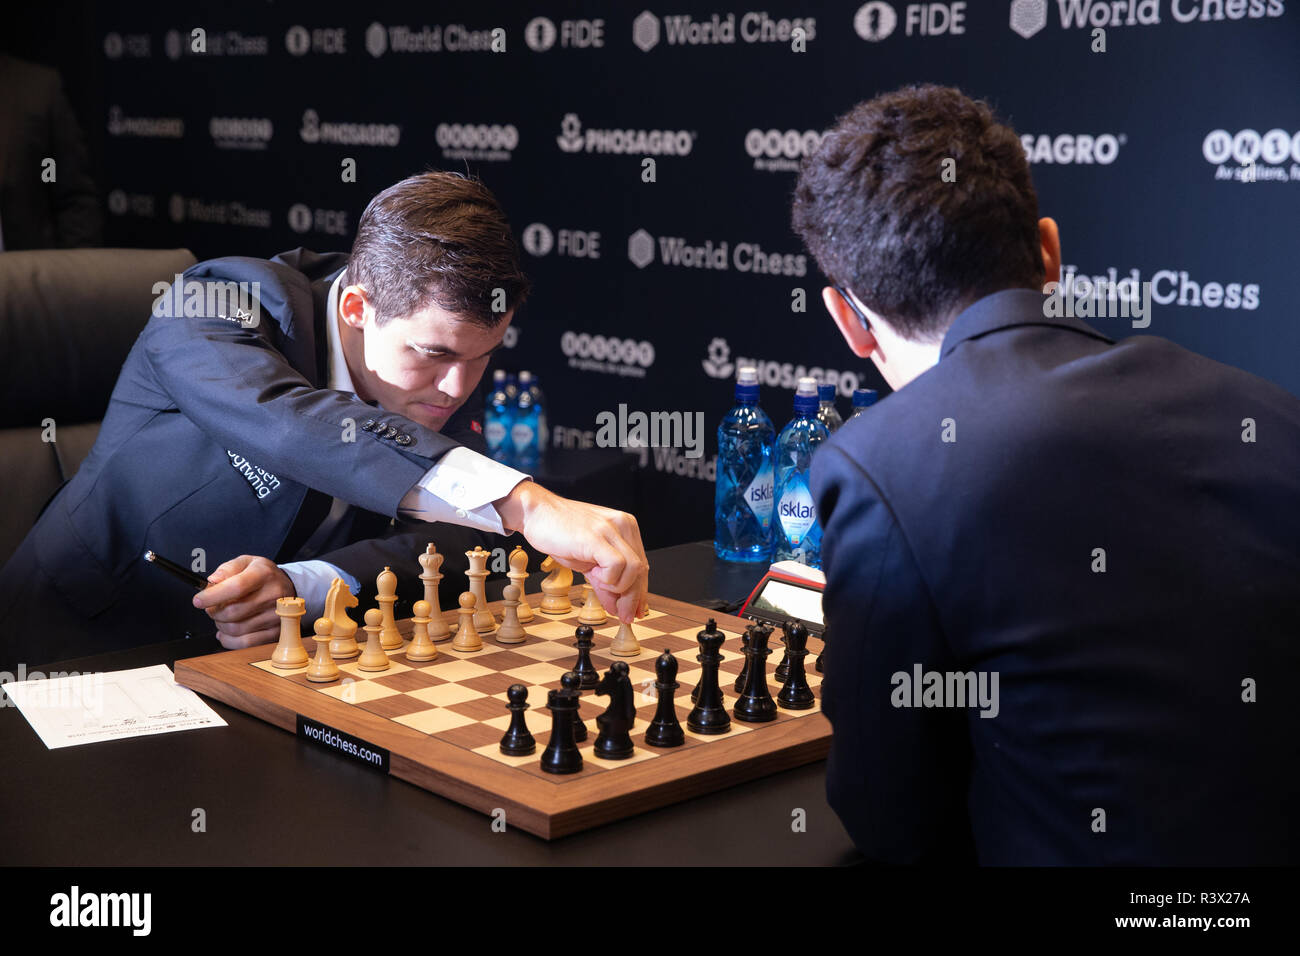 Fabiano Caruana vs Viswanathan Anand - 2019-06-12 - 7th Norway Chess 2019 -  Chess Game No Commentary 